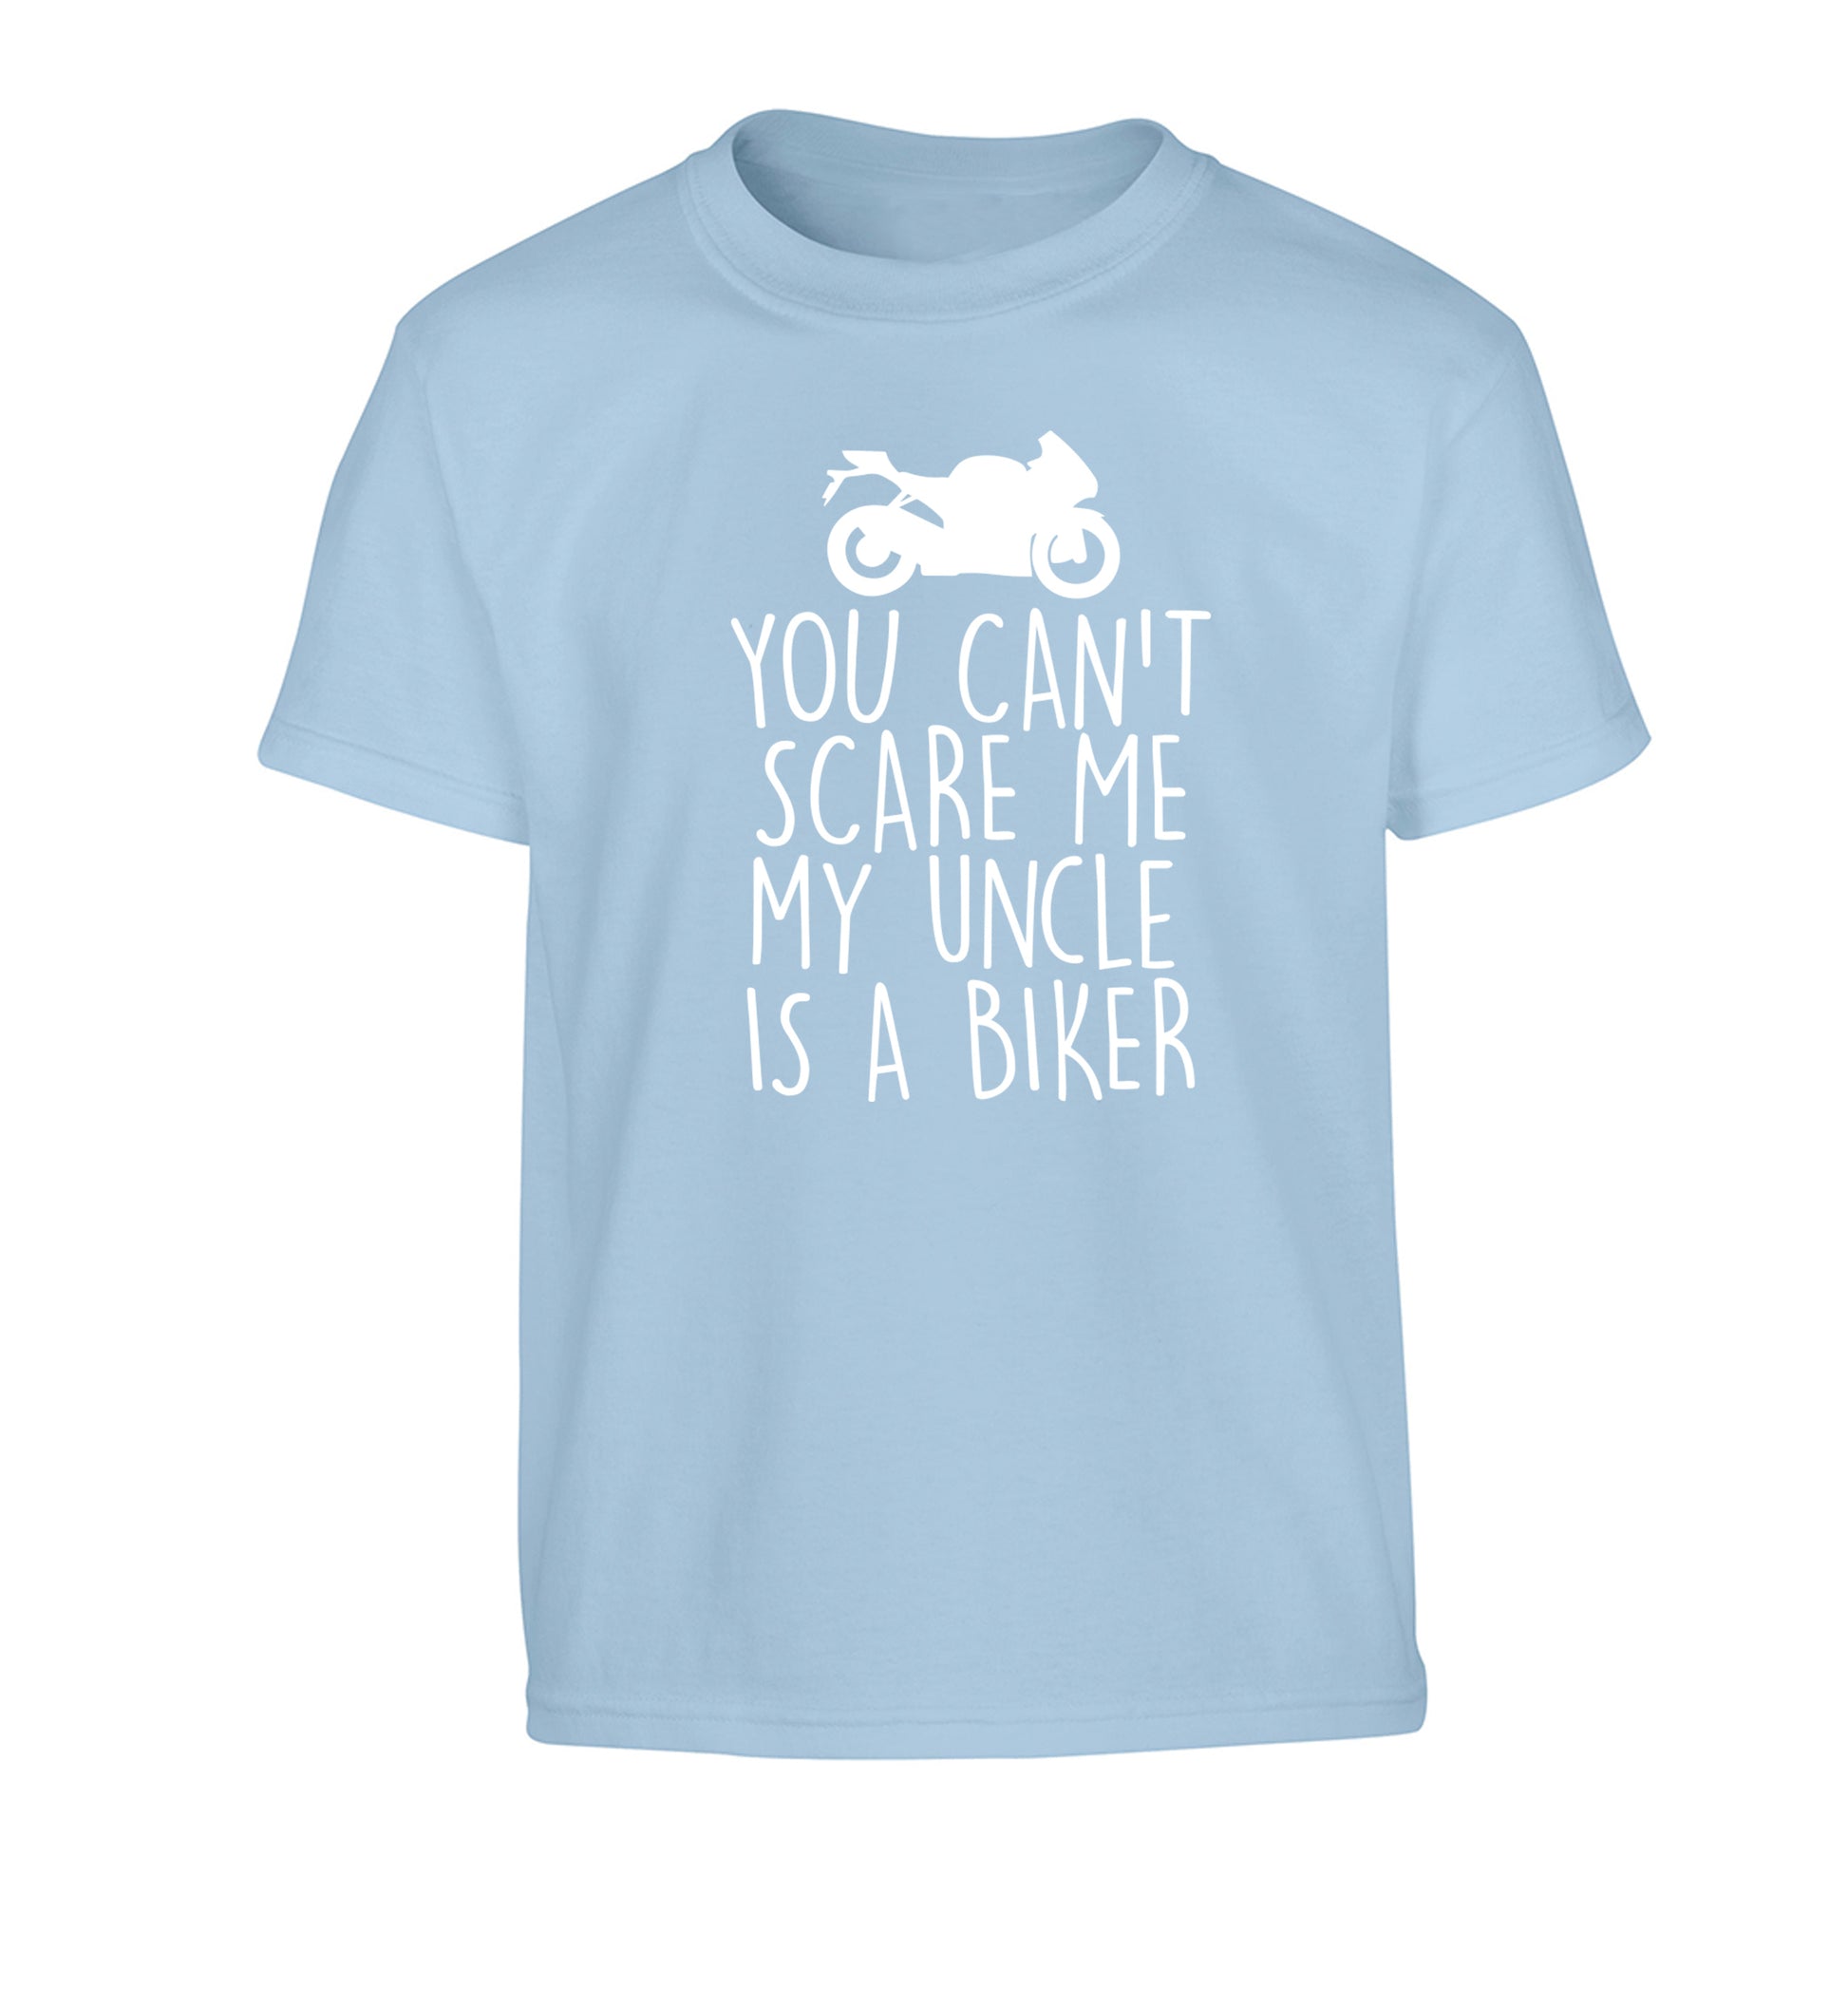 You can't scare me my uncle is a biker Children's light blue Tshirt 12-13 Years